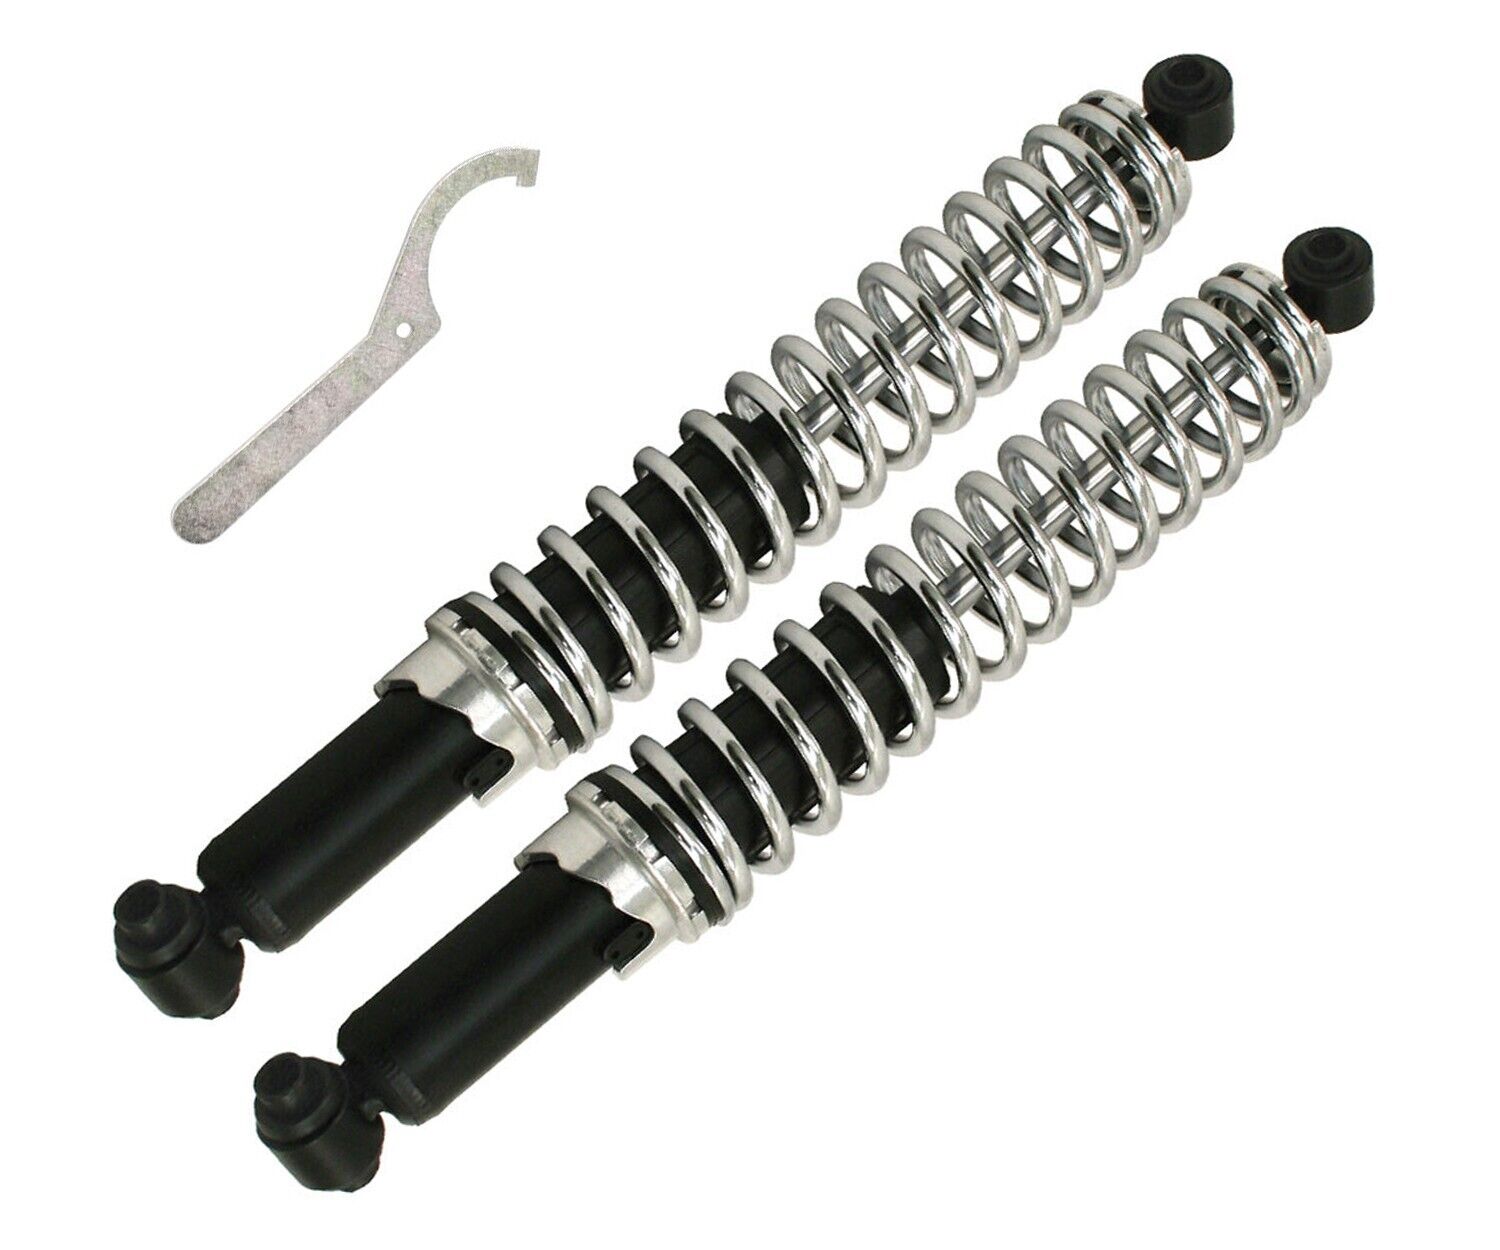 2 Coil-Over Shocks for Early VW Bug, Beetle, Front or Rear, Replaces EMPI 9570-8